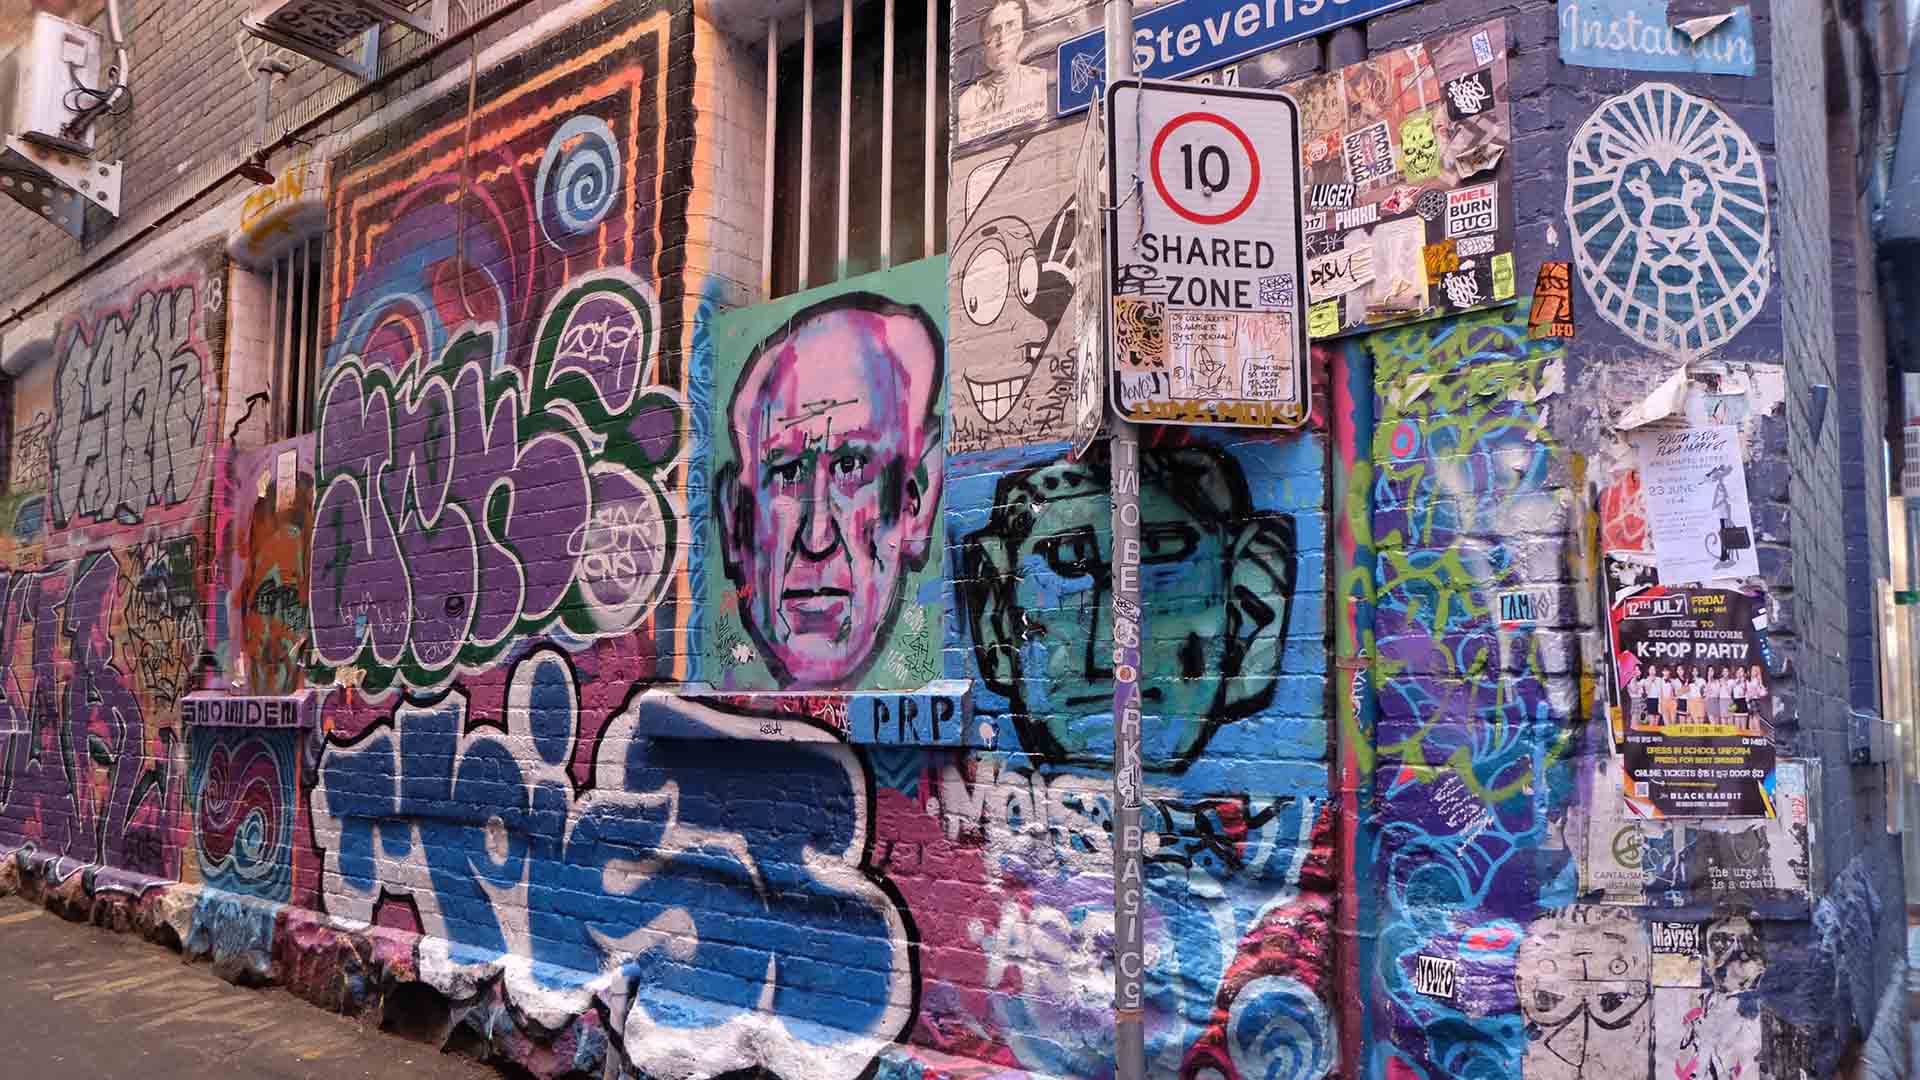 Forty Melbourne Laneways Are Set to Undergo a Major Art-Fuelled Revamp